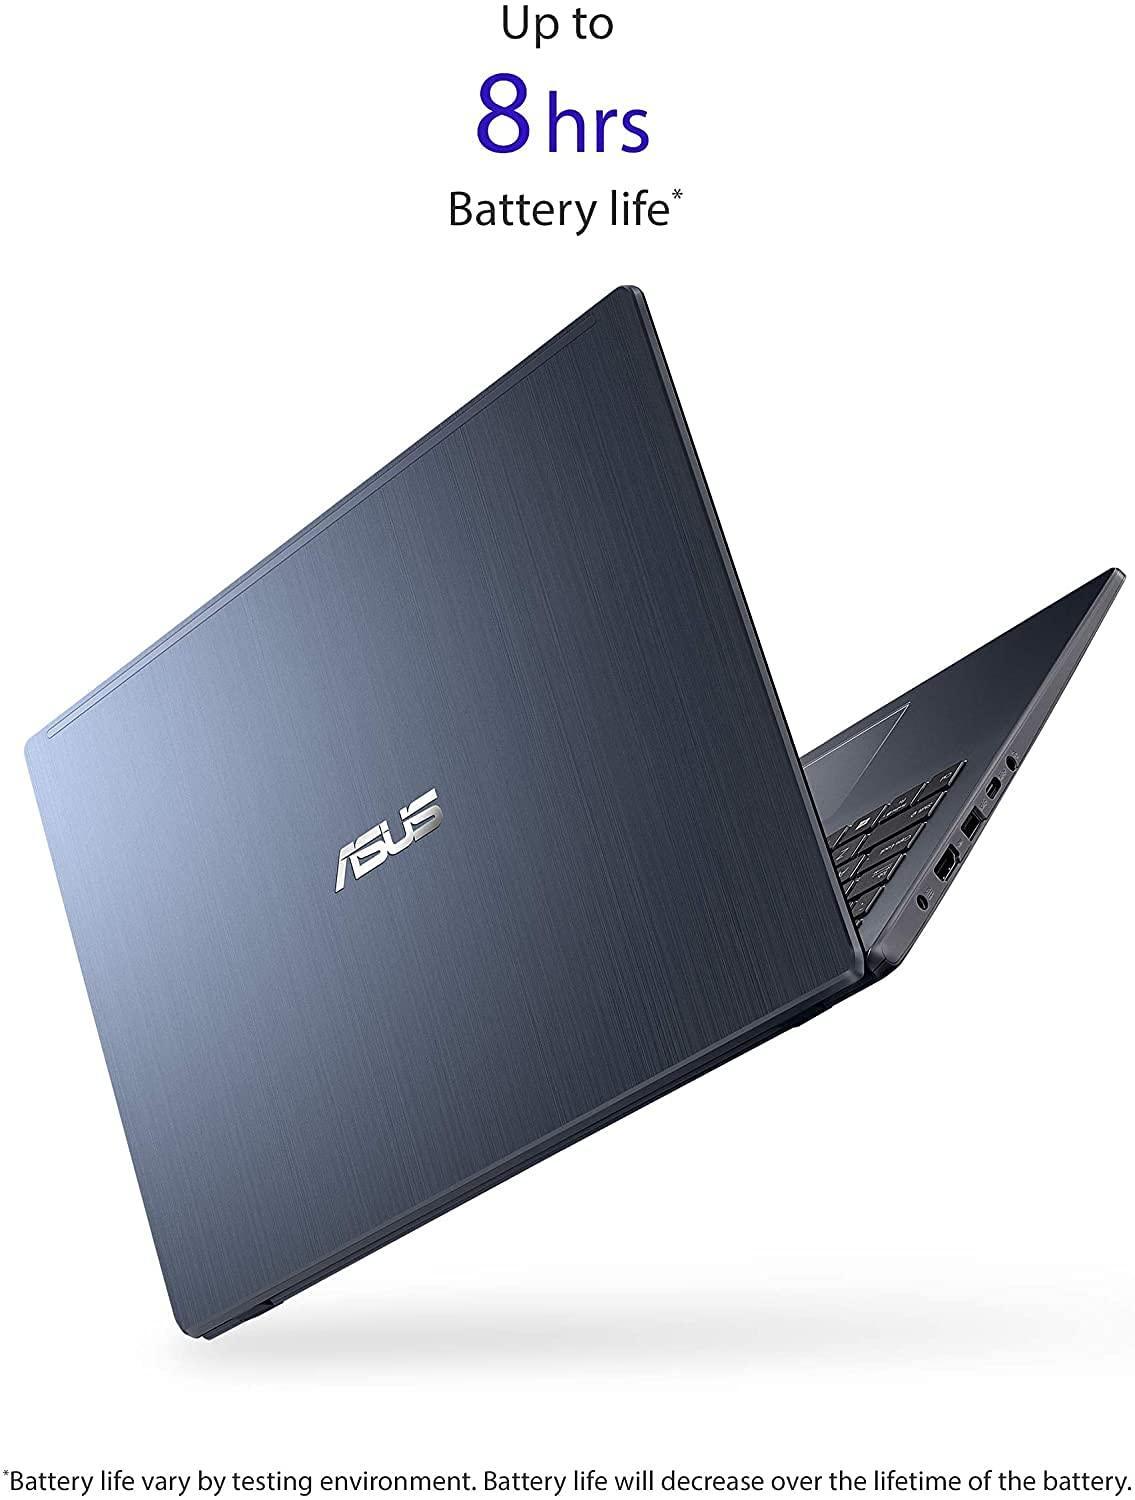 2021 ASUS L510 Ultra Thin Laptop, 15.6" FHD Display - Star Black - Store For Gamers